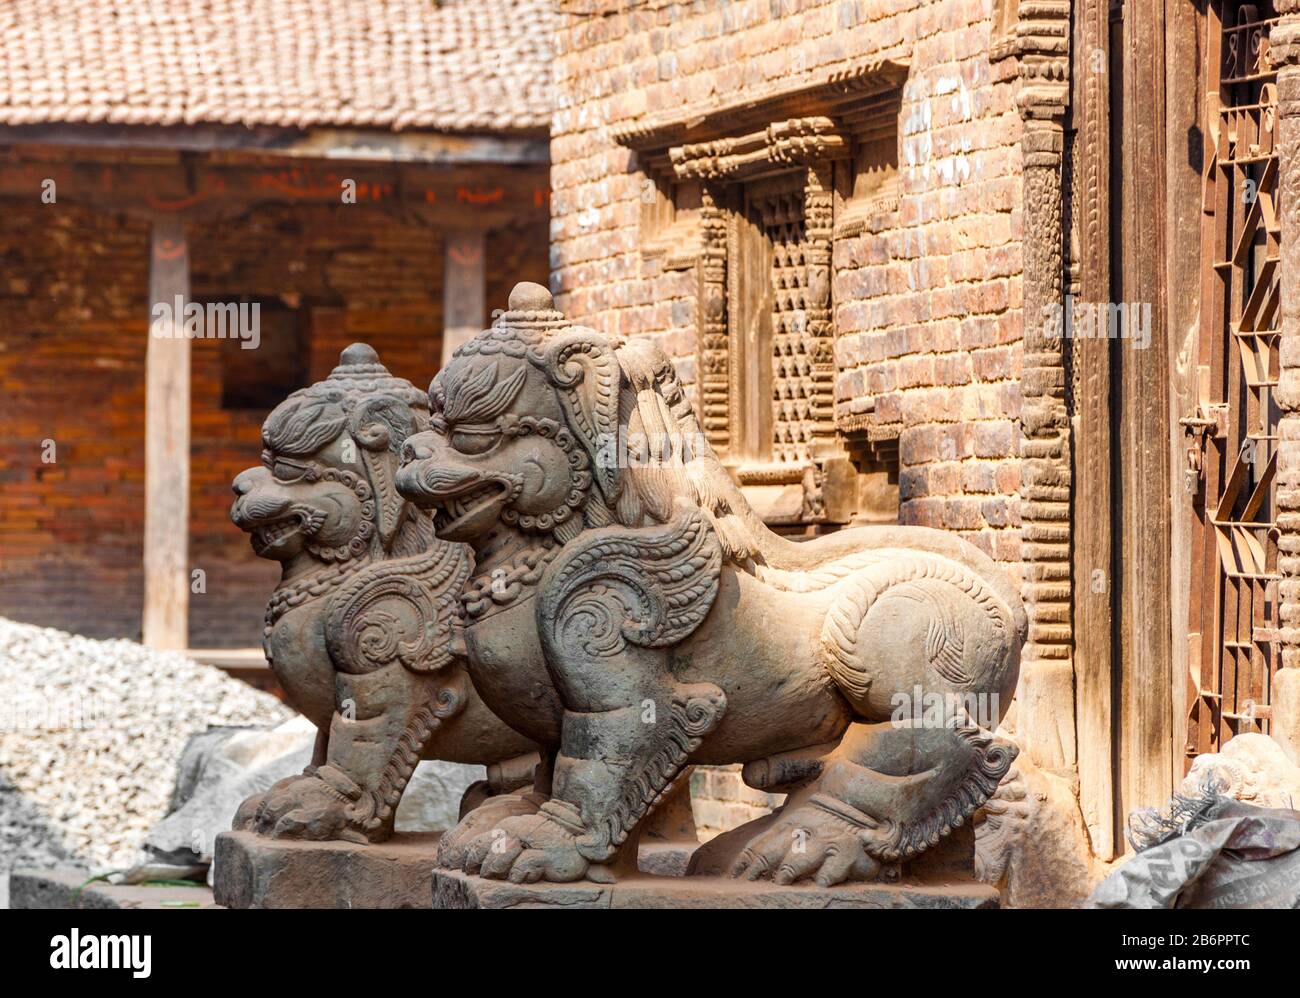 Amazing example of the woodworking and stone carving craftsmanship at Kathmandu temple Stock Photo